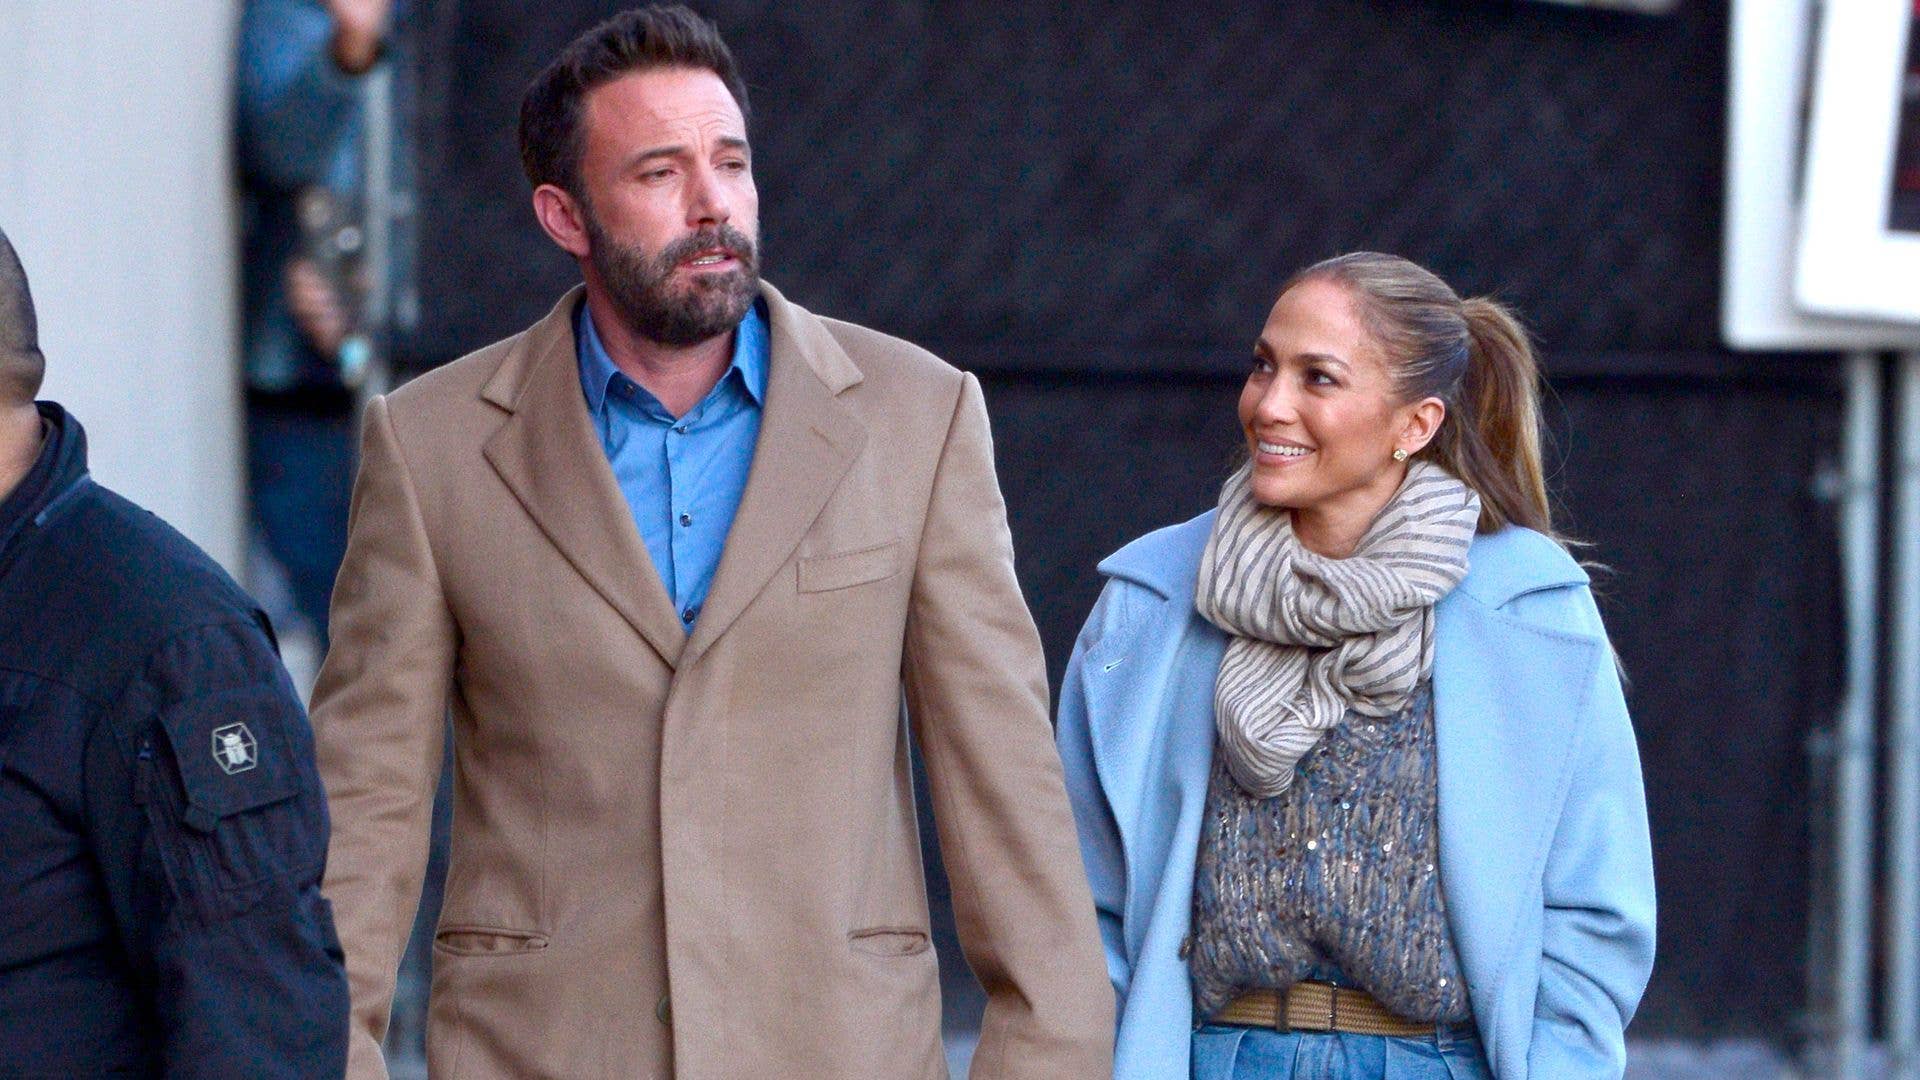 Jennifer Lopez Playfully Responds To Admirers Of Ben Affleck With A Spicy Comeback